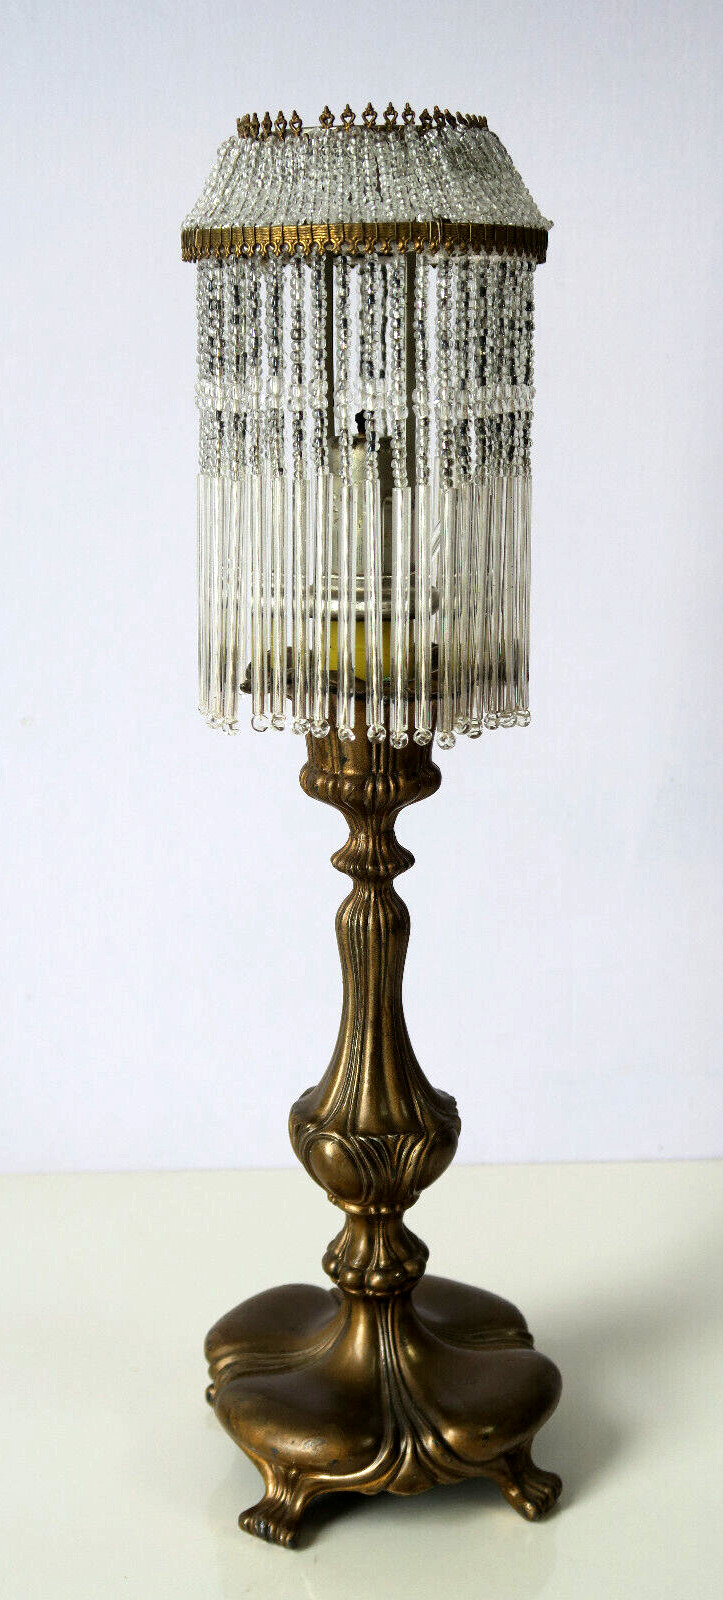 Art Nouveau Pairpoint Candle Lamp with Glass Beaded Shade - Early 1900's Antique